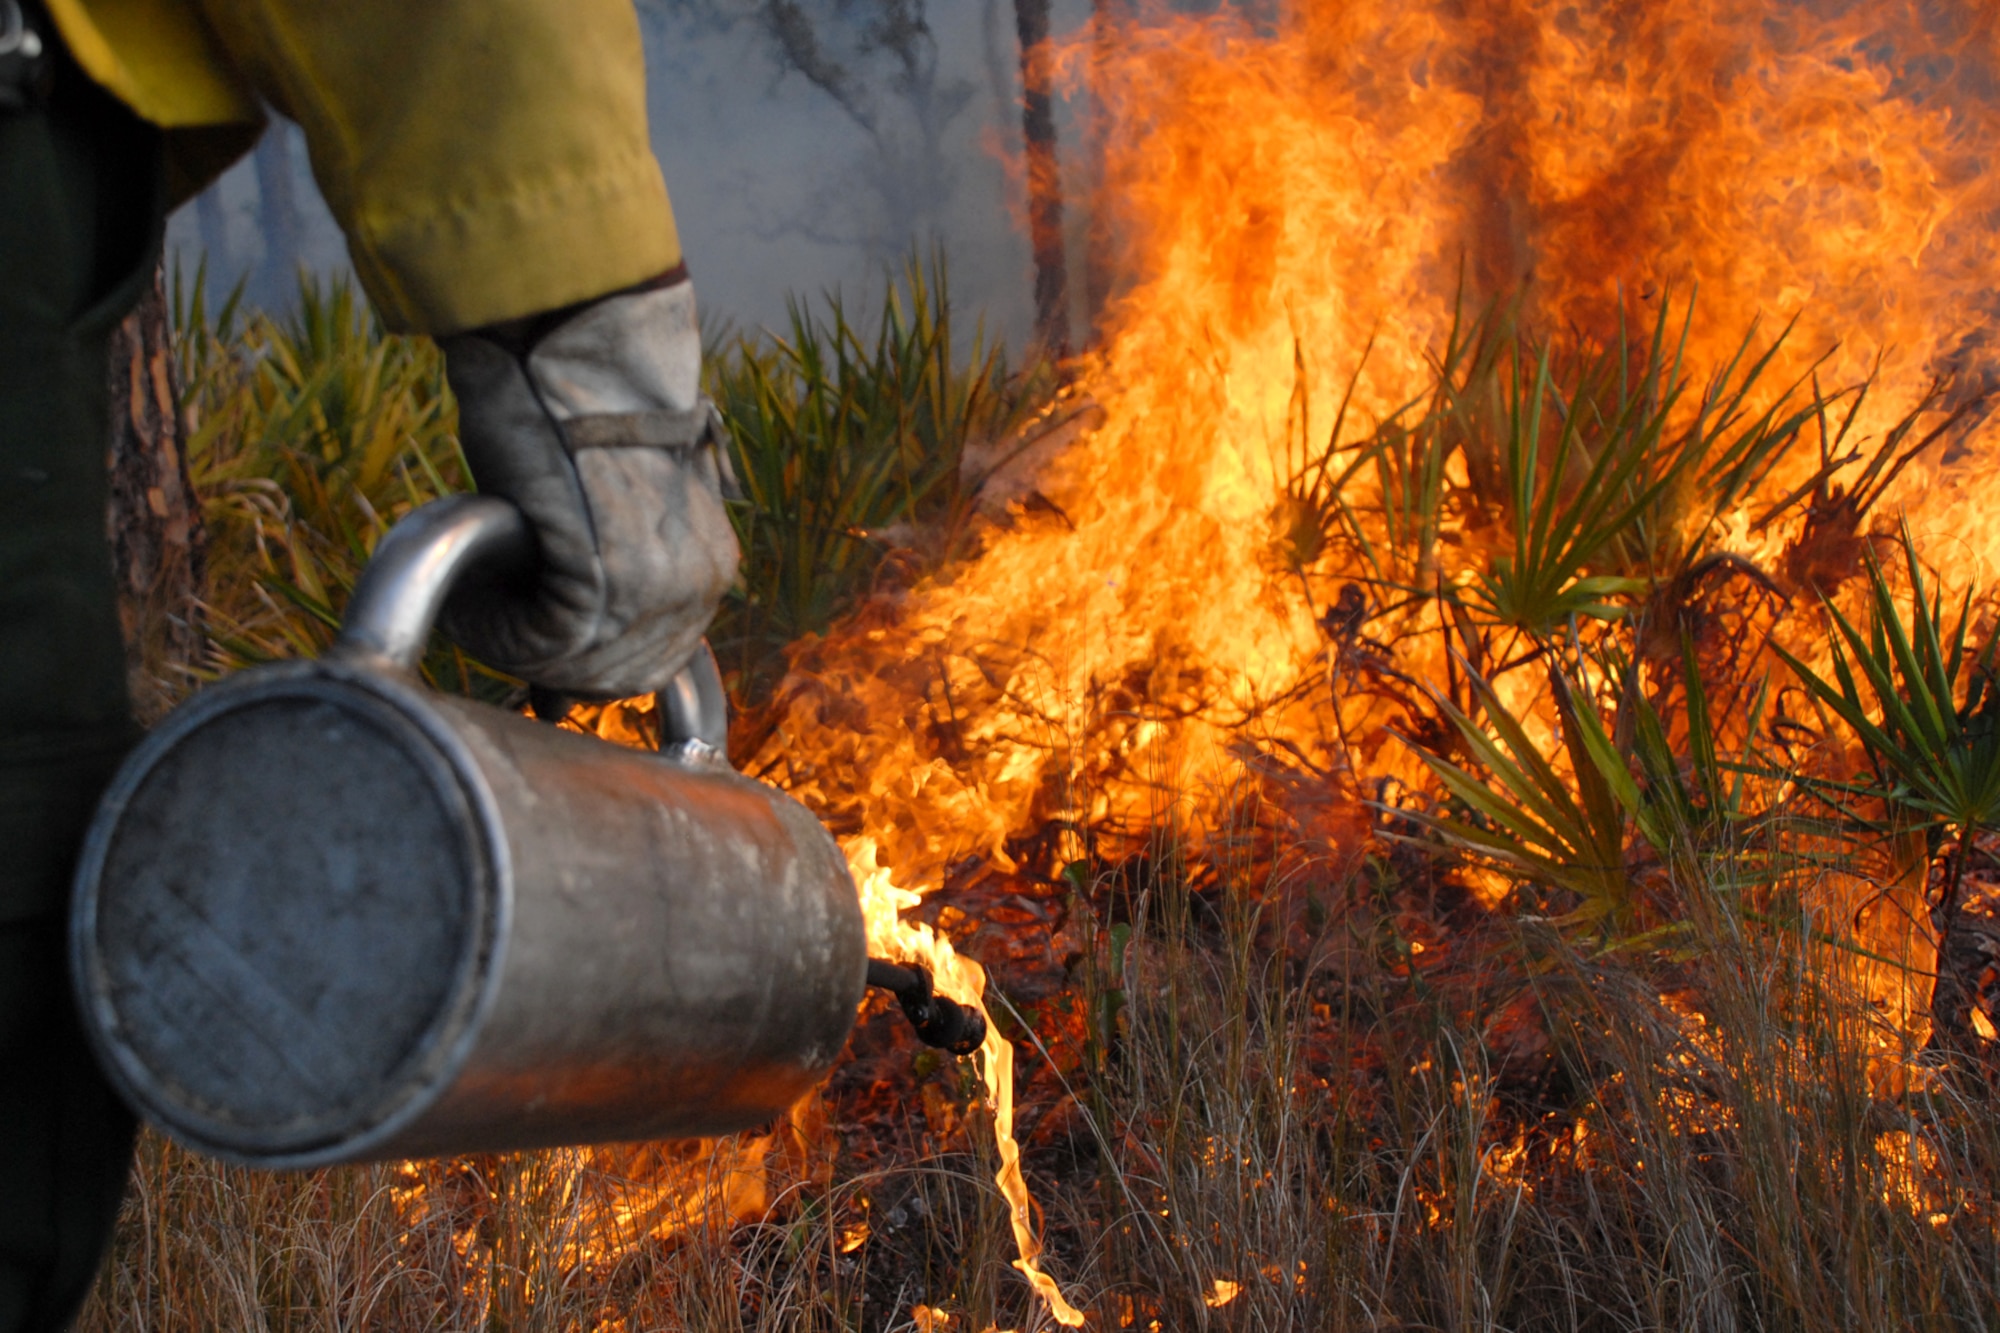 EGLIN AIR FORCE BASE, Fla. -- David Grimm, a Jackson Guard forestry technician and wildland fire specialist, uses a fire drip can to start a fire line during a prescribed burn at White Point, an 85-acre recreation area on the Choctawhatchee Bay Jan. 29. Many native plants and animal species depend on Eglin's fire-dependent long-leaf pine ecosystem, 11 of which are federally protected. Endangered species such as the red-cockaded woodpecker, depend on fire that is typically caused by either lightning strikes or Eglin's resident fire managers to survive. As of the 2008 control burn season, Jackson Guard's five-year average is 73,000 acres burned annually. (U.S. Air Force Photo/ Staff Sgt. Mike Meares)